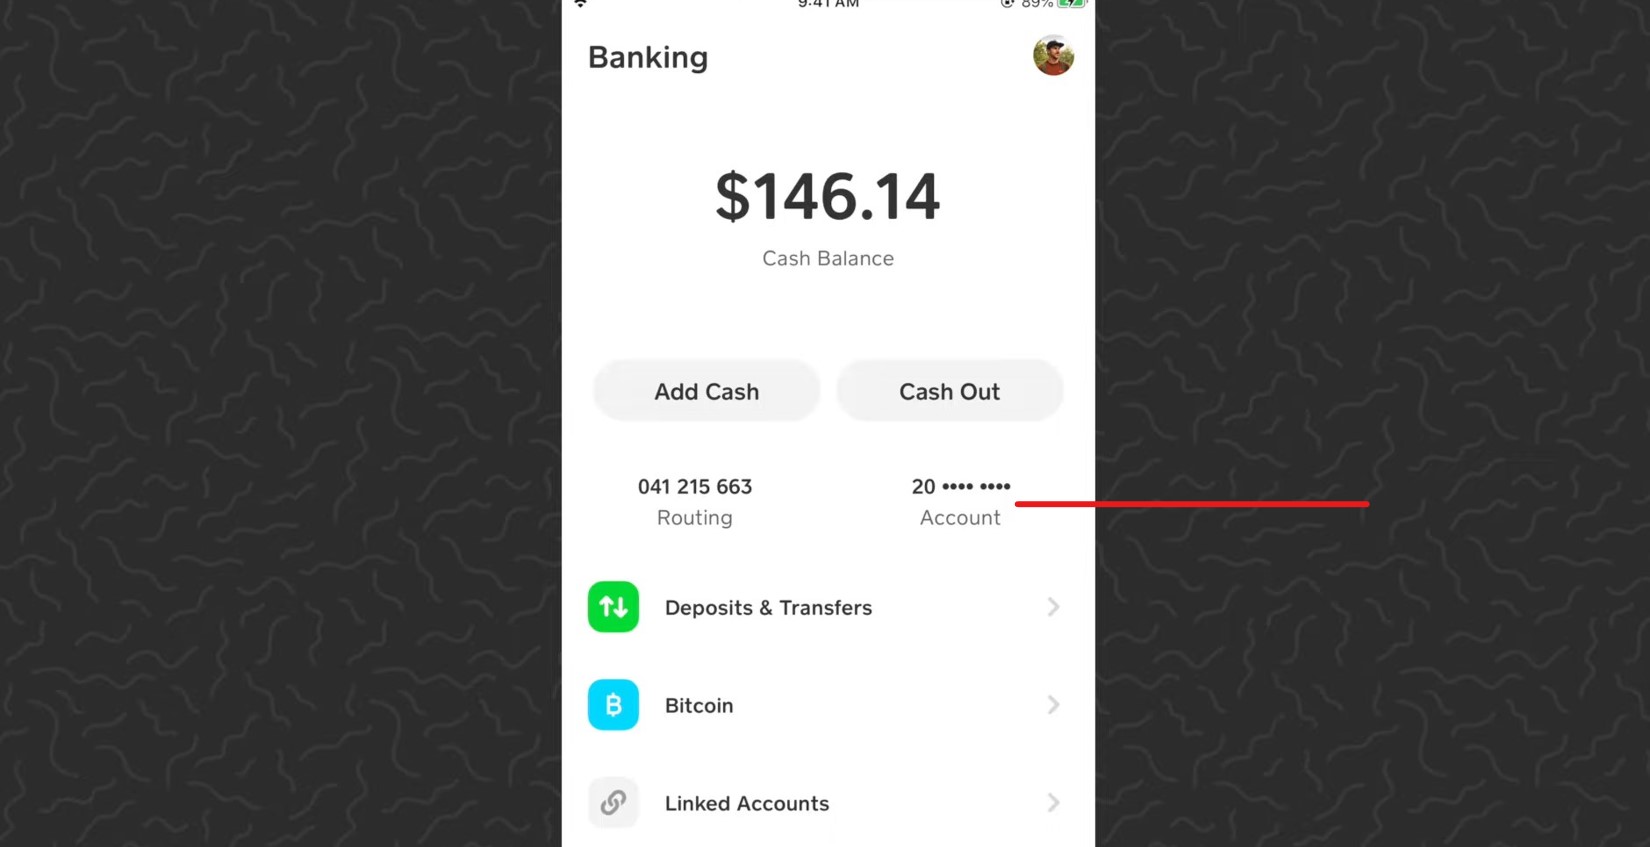 View Account Details